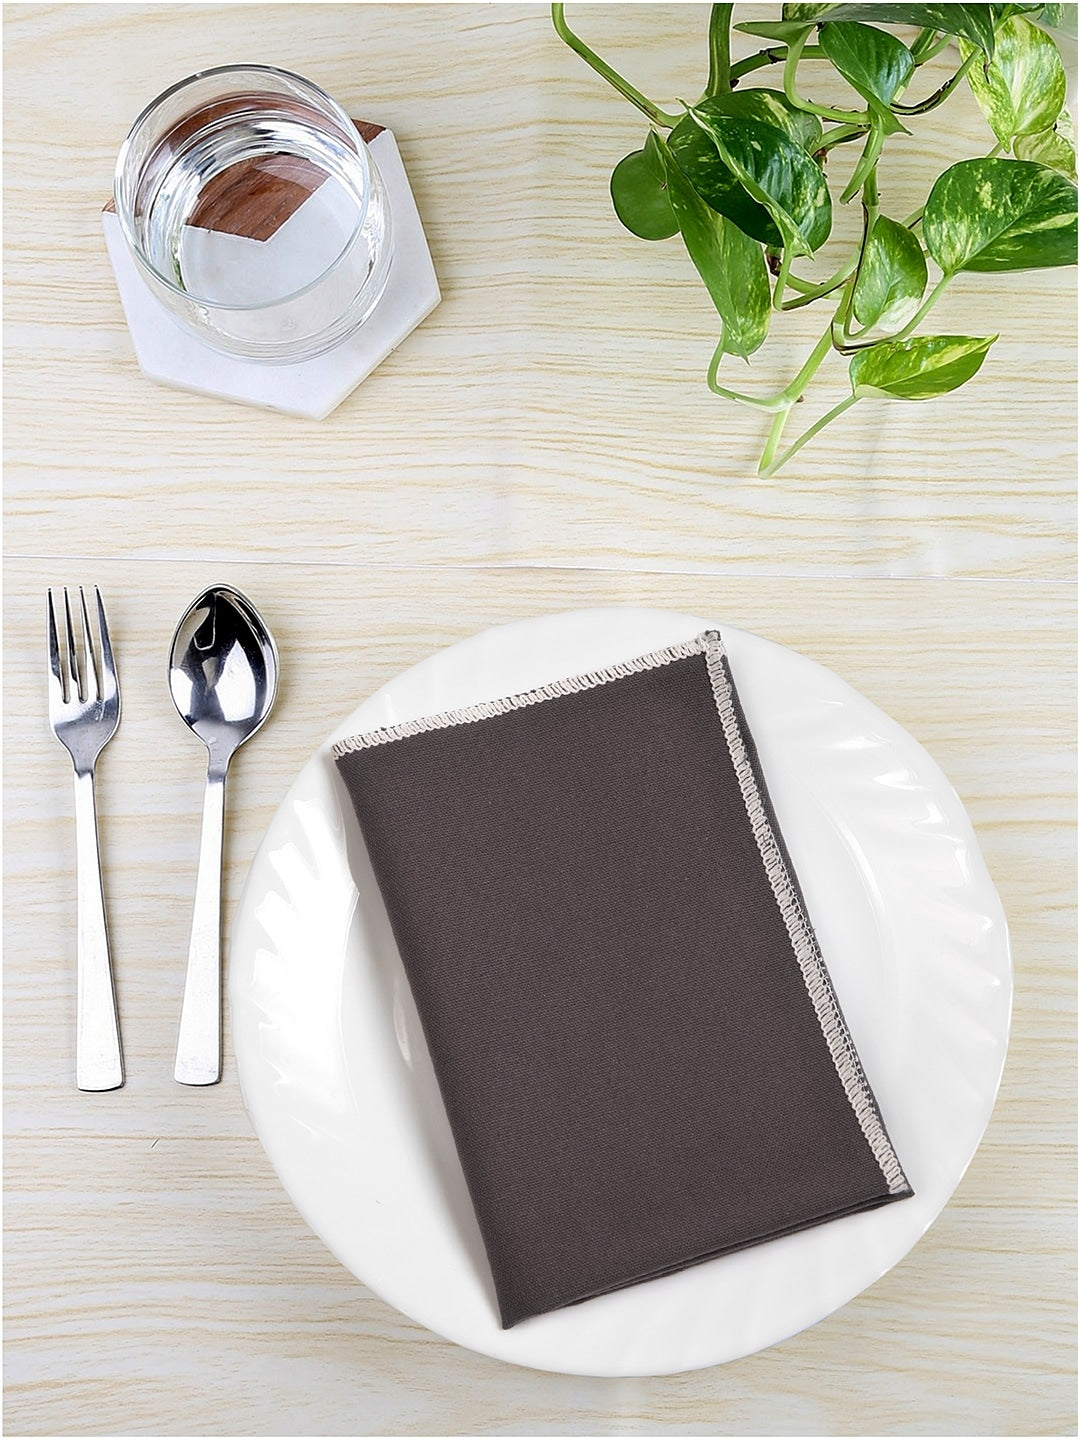 Blanc9 Set of 6 & 8 Frontiere Table Napkin